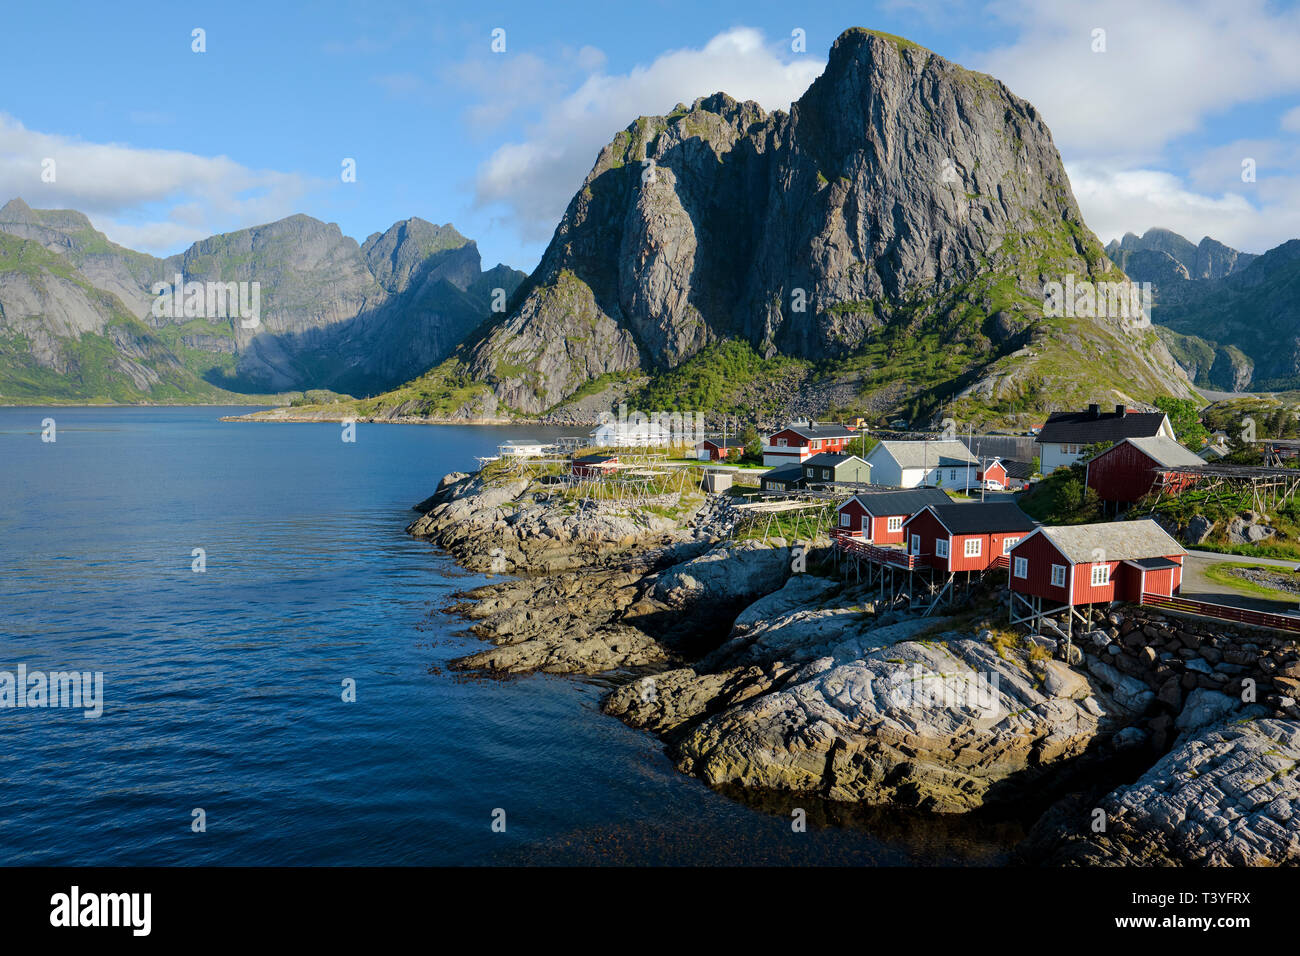 Hamnoy Bridge Viewpoint of the red Rorbu houses of Hamnoy fishing village and landscape on Moskenesøya in the Lofoten Islands Nordland Norway. Stock Photo